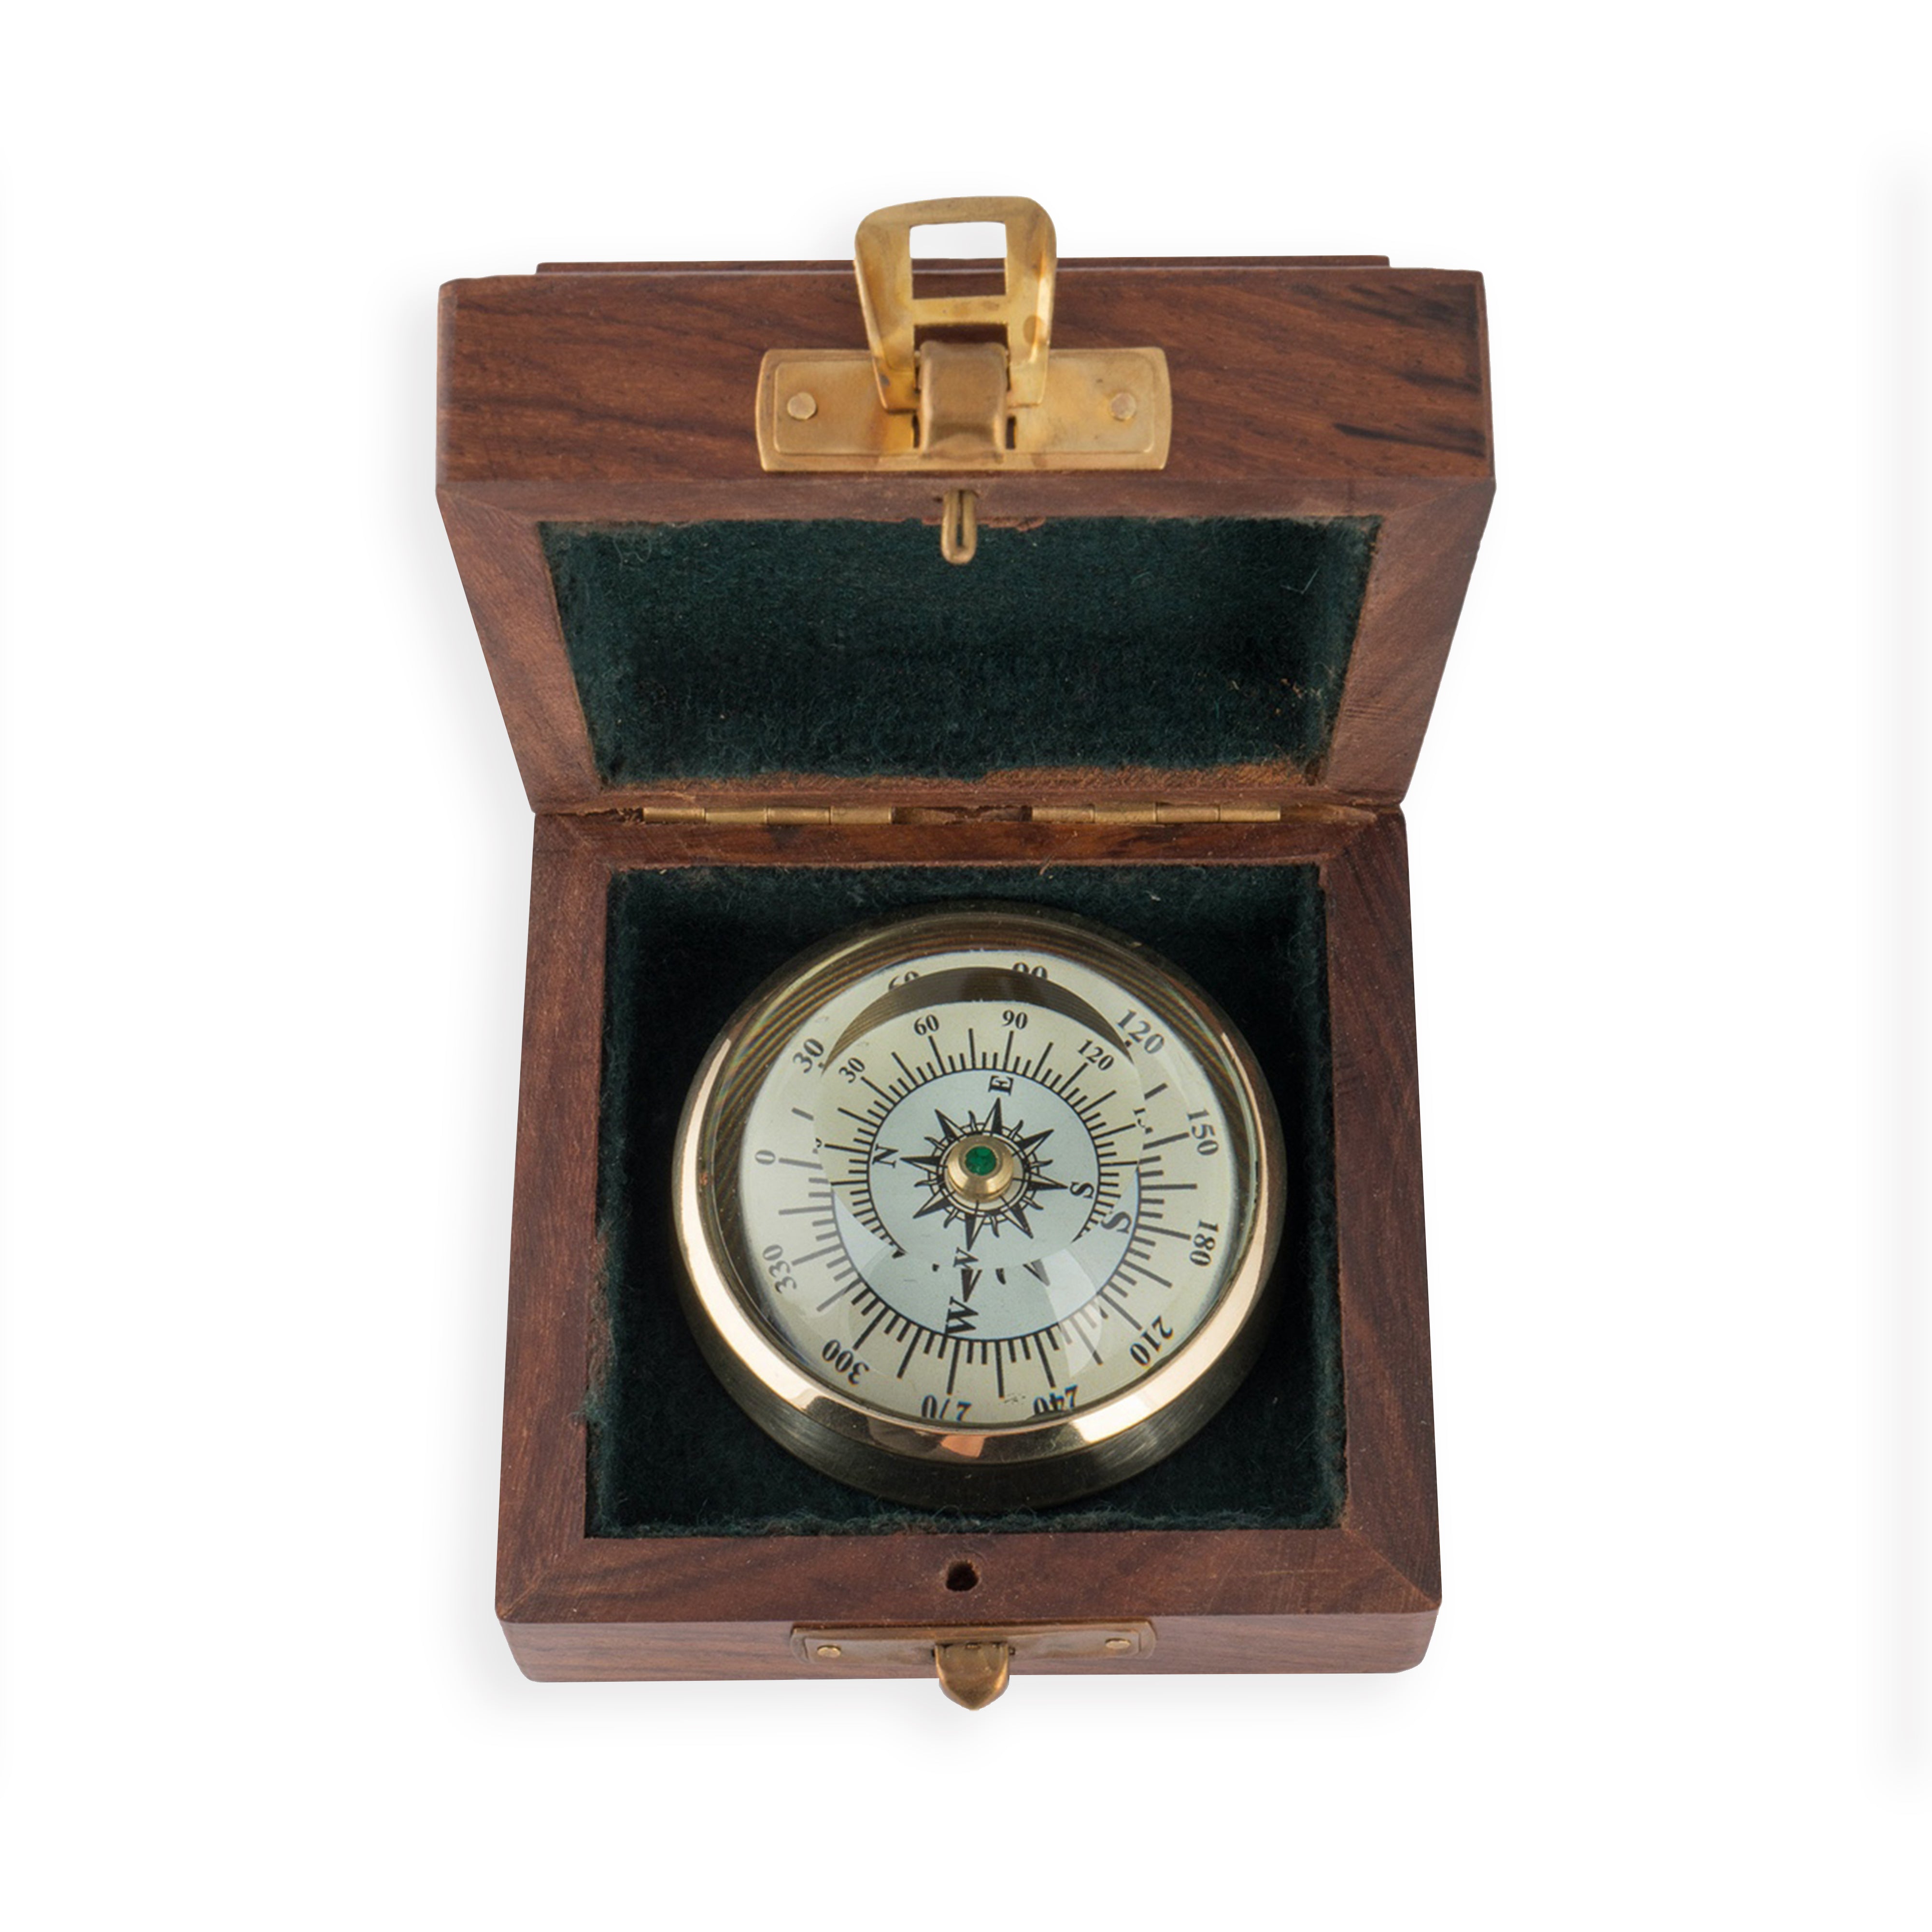 Floating Curve Compass in Wood Presentation Box